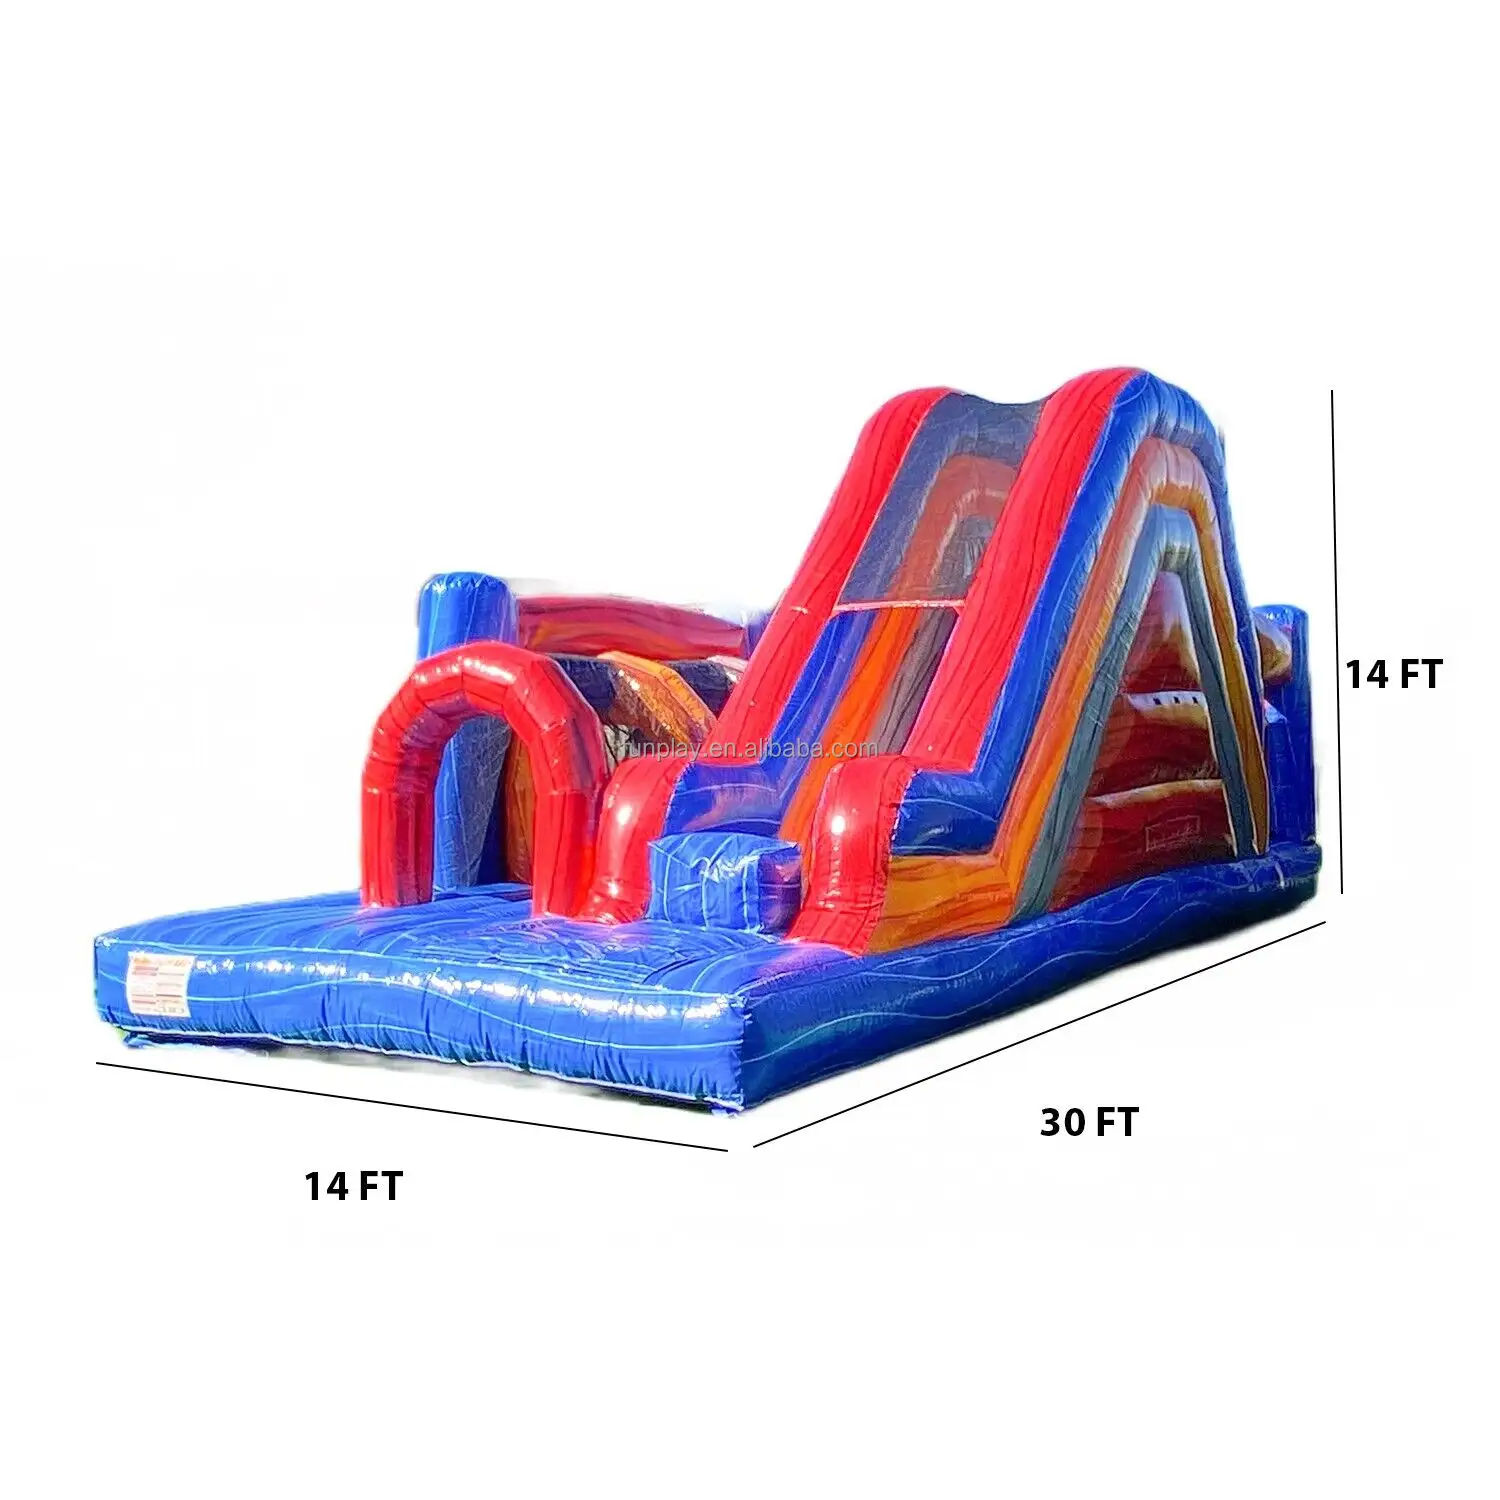 High quality PVC large inflatable obstacle course and inflatable slide